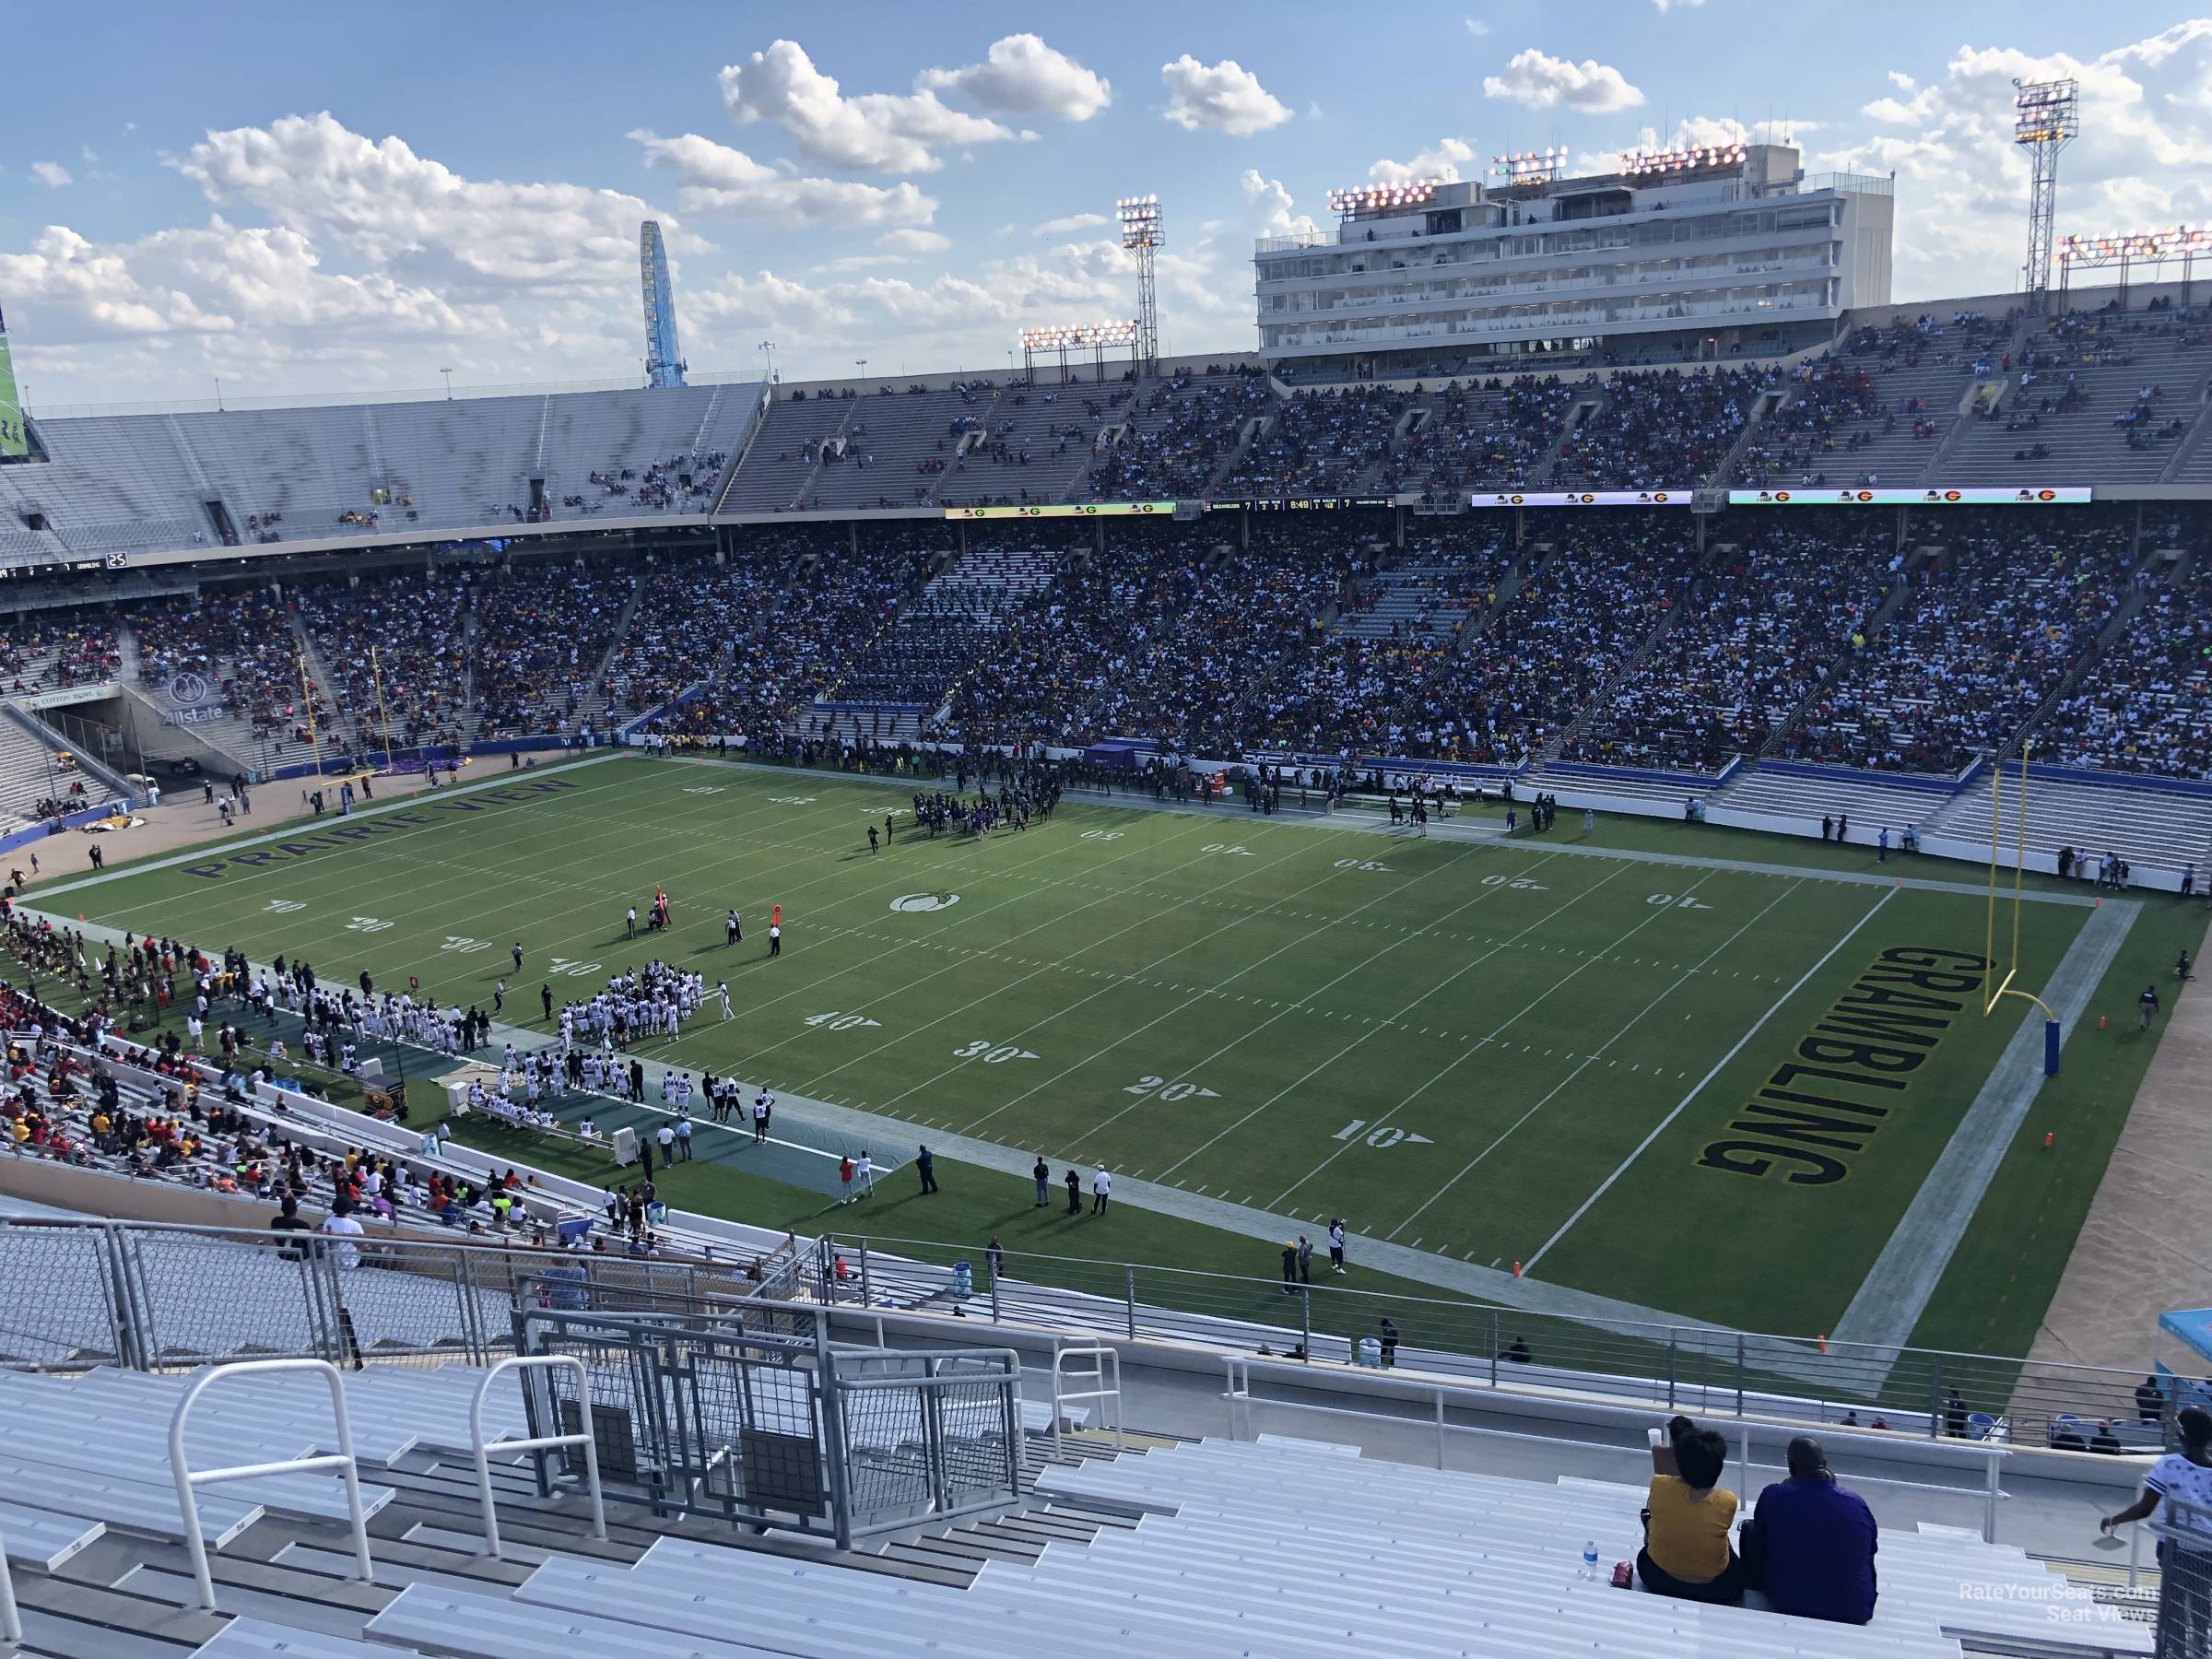 section 123, row 22 seat view  - cotton bowl